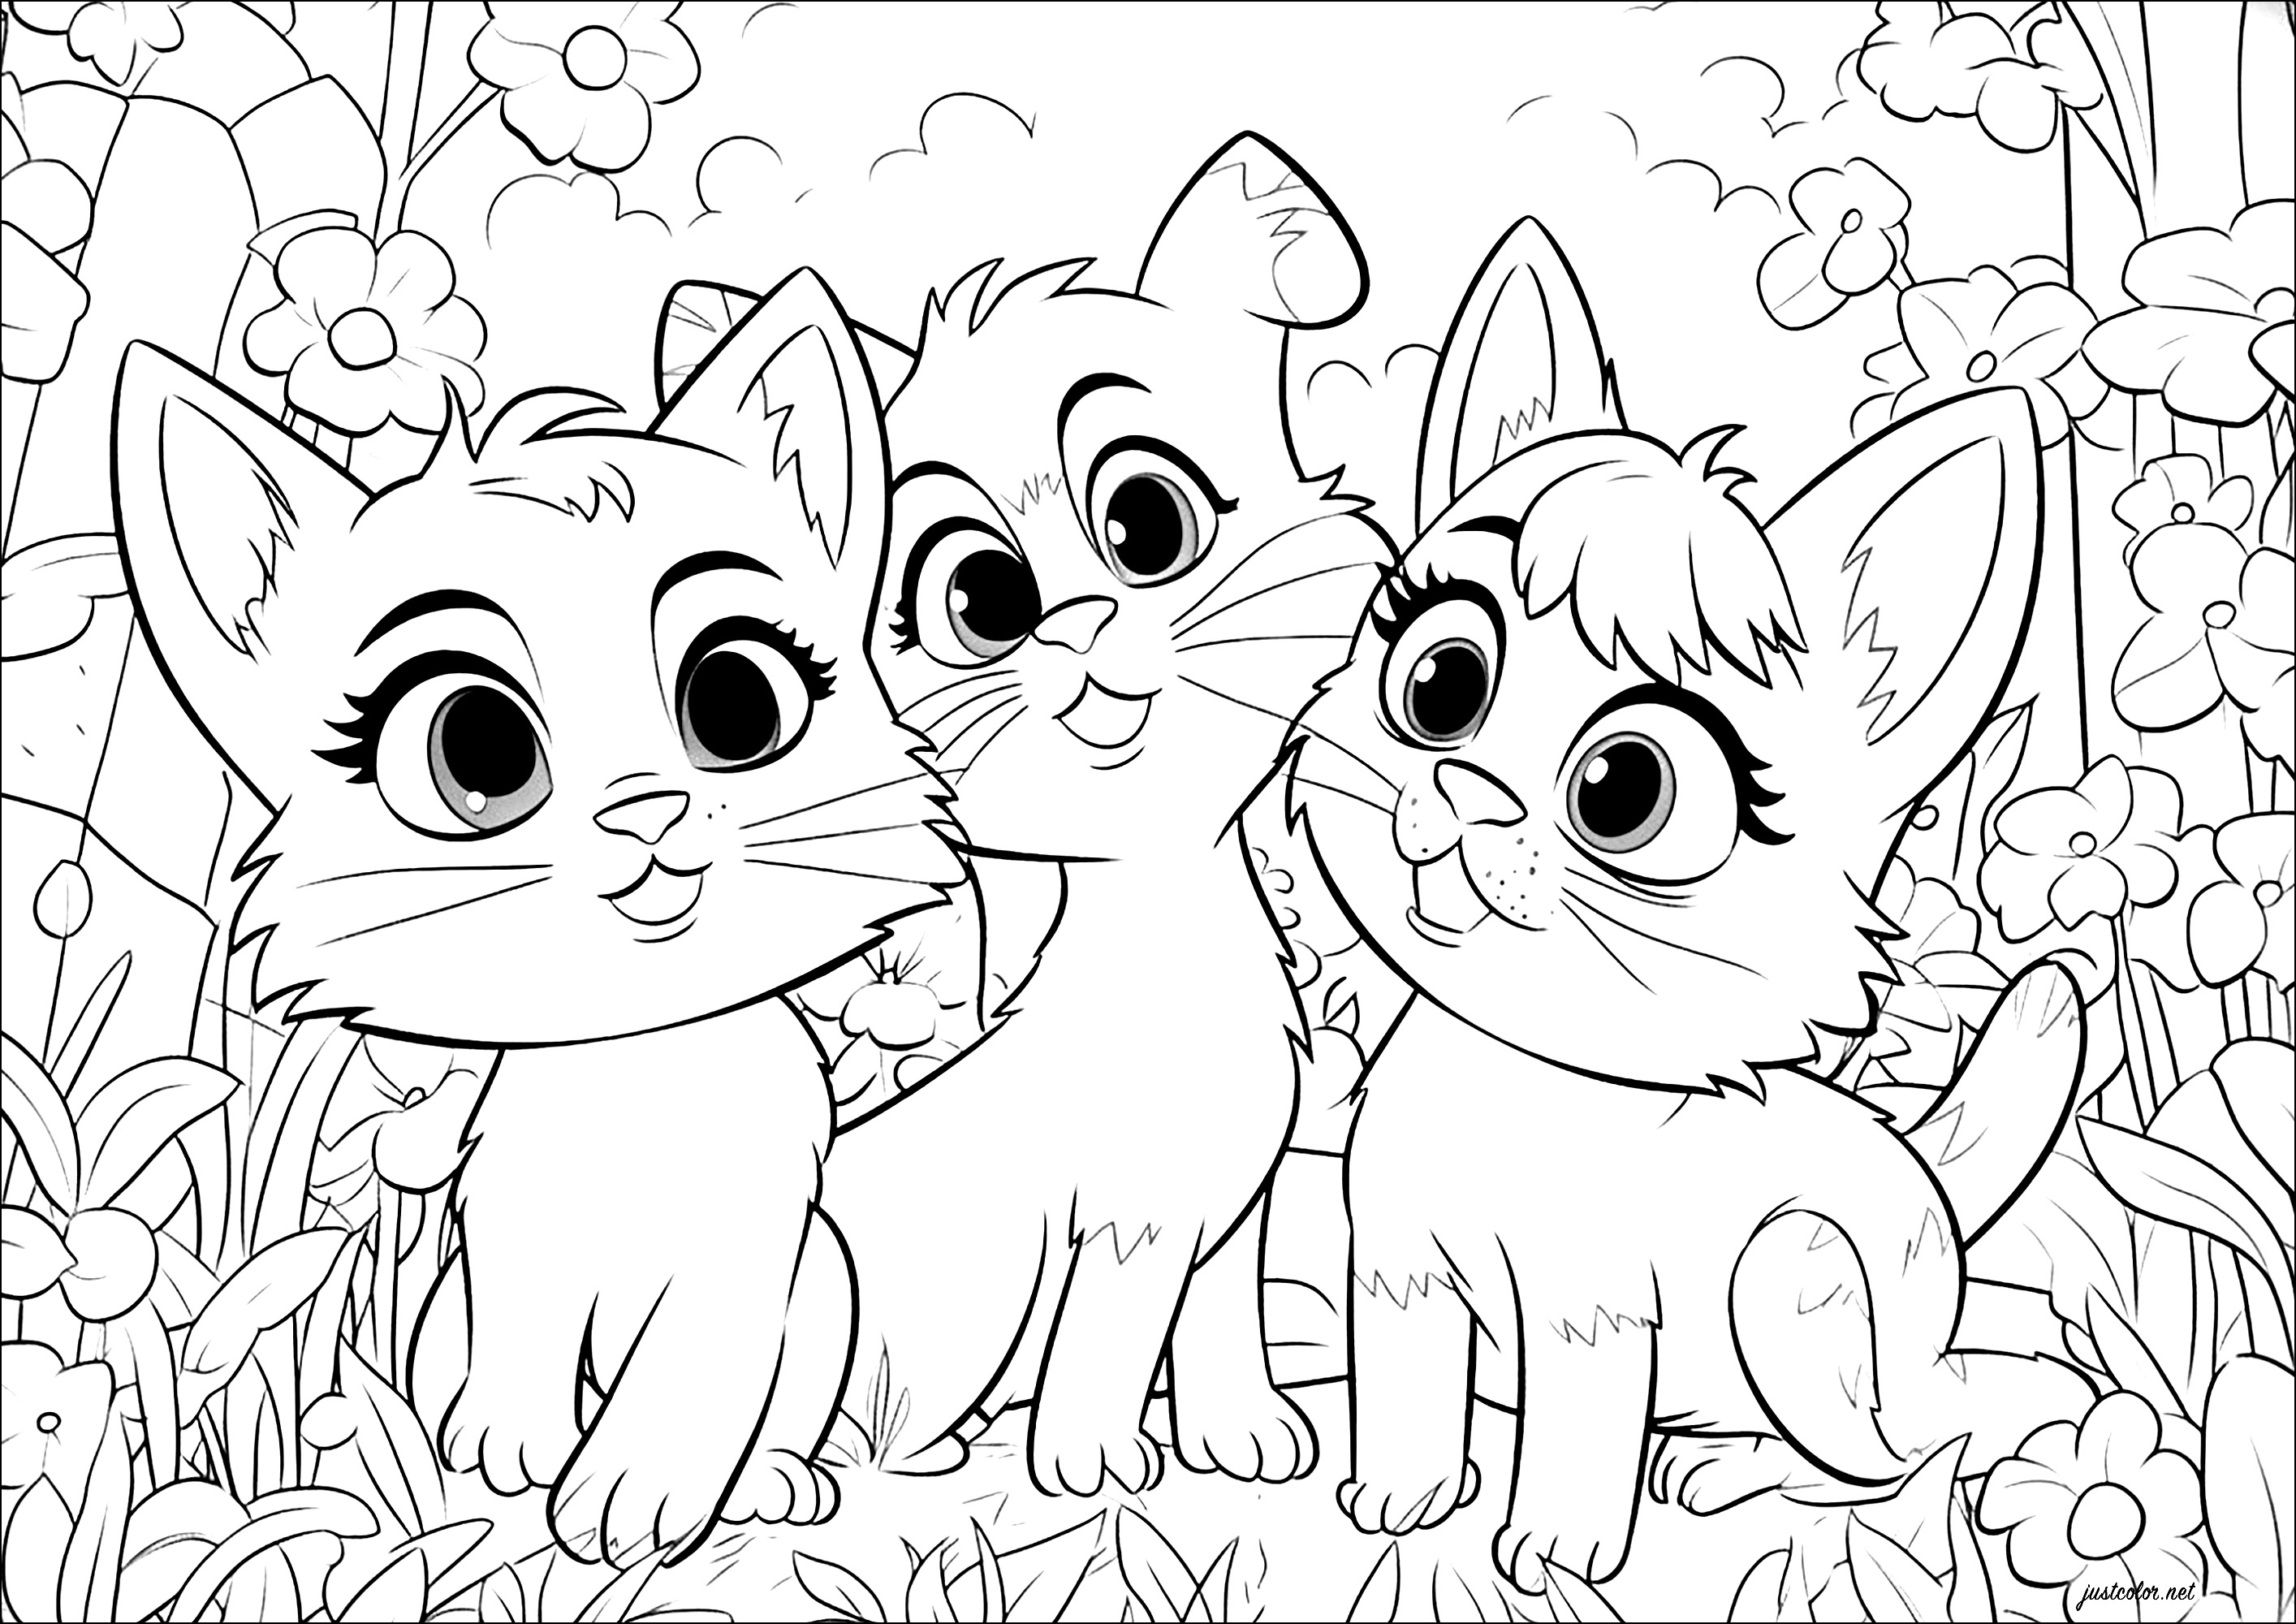 Three cats, Disney - Pixar style. These three cats are drawn in a style reminiscent of Disney - Pixar animated films.